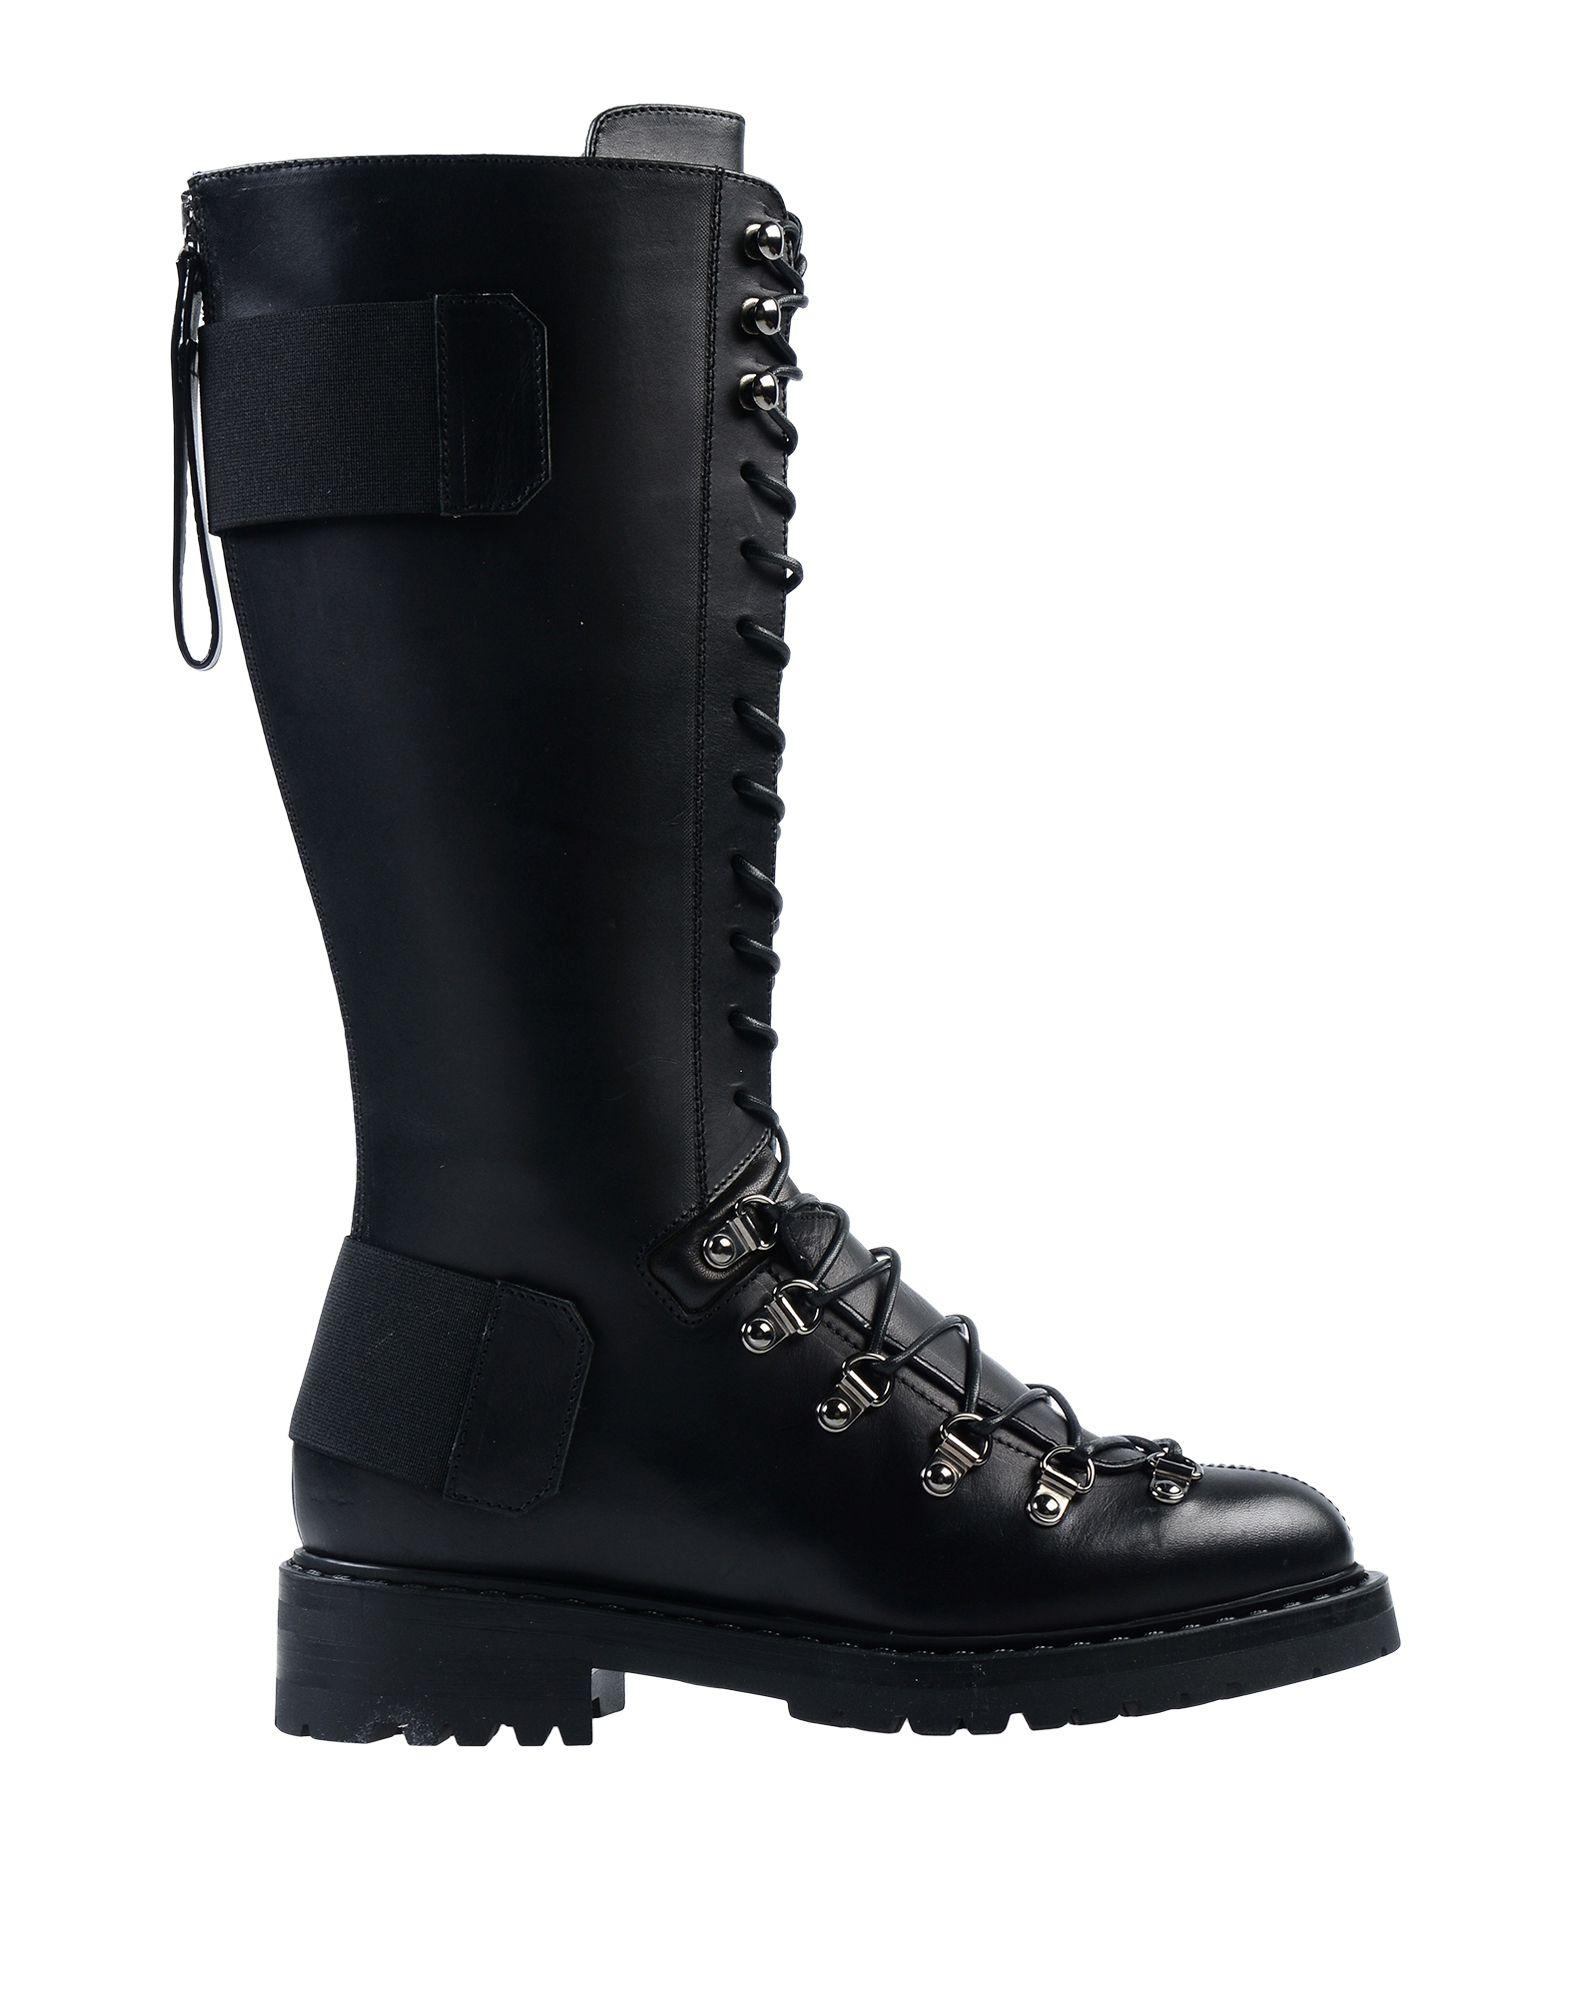 Barracuda Leather Boots in Black - Lyst